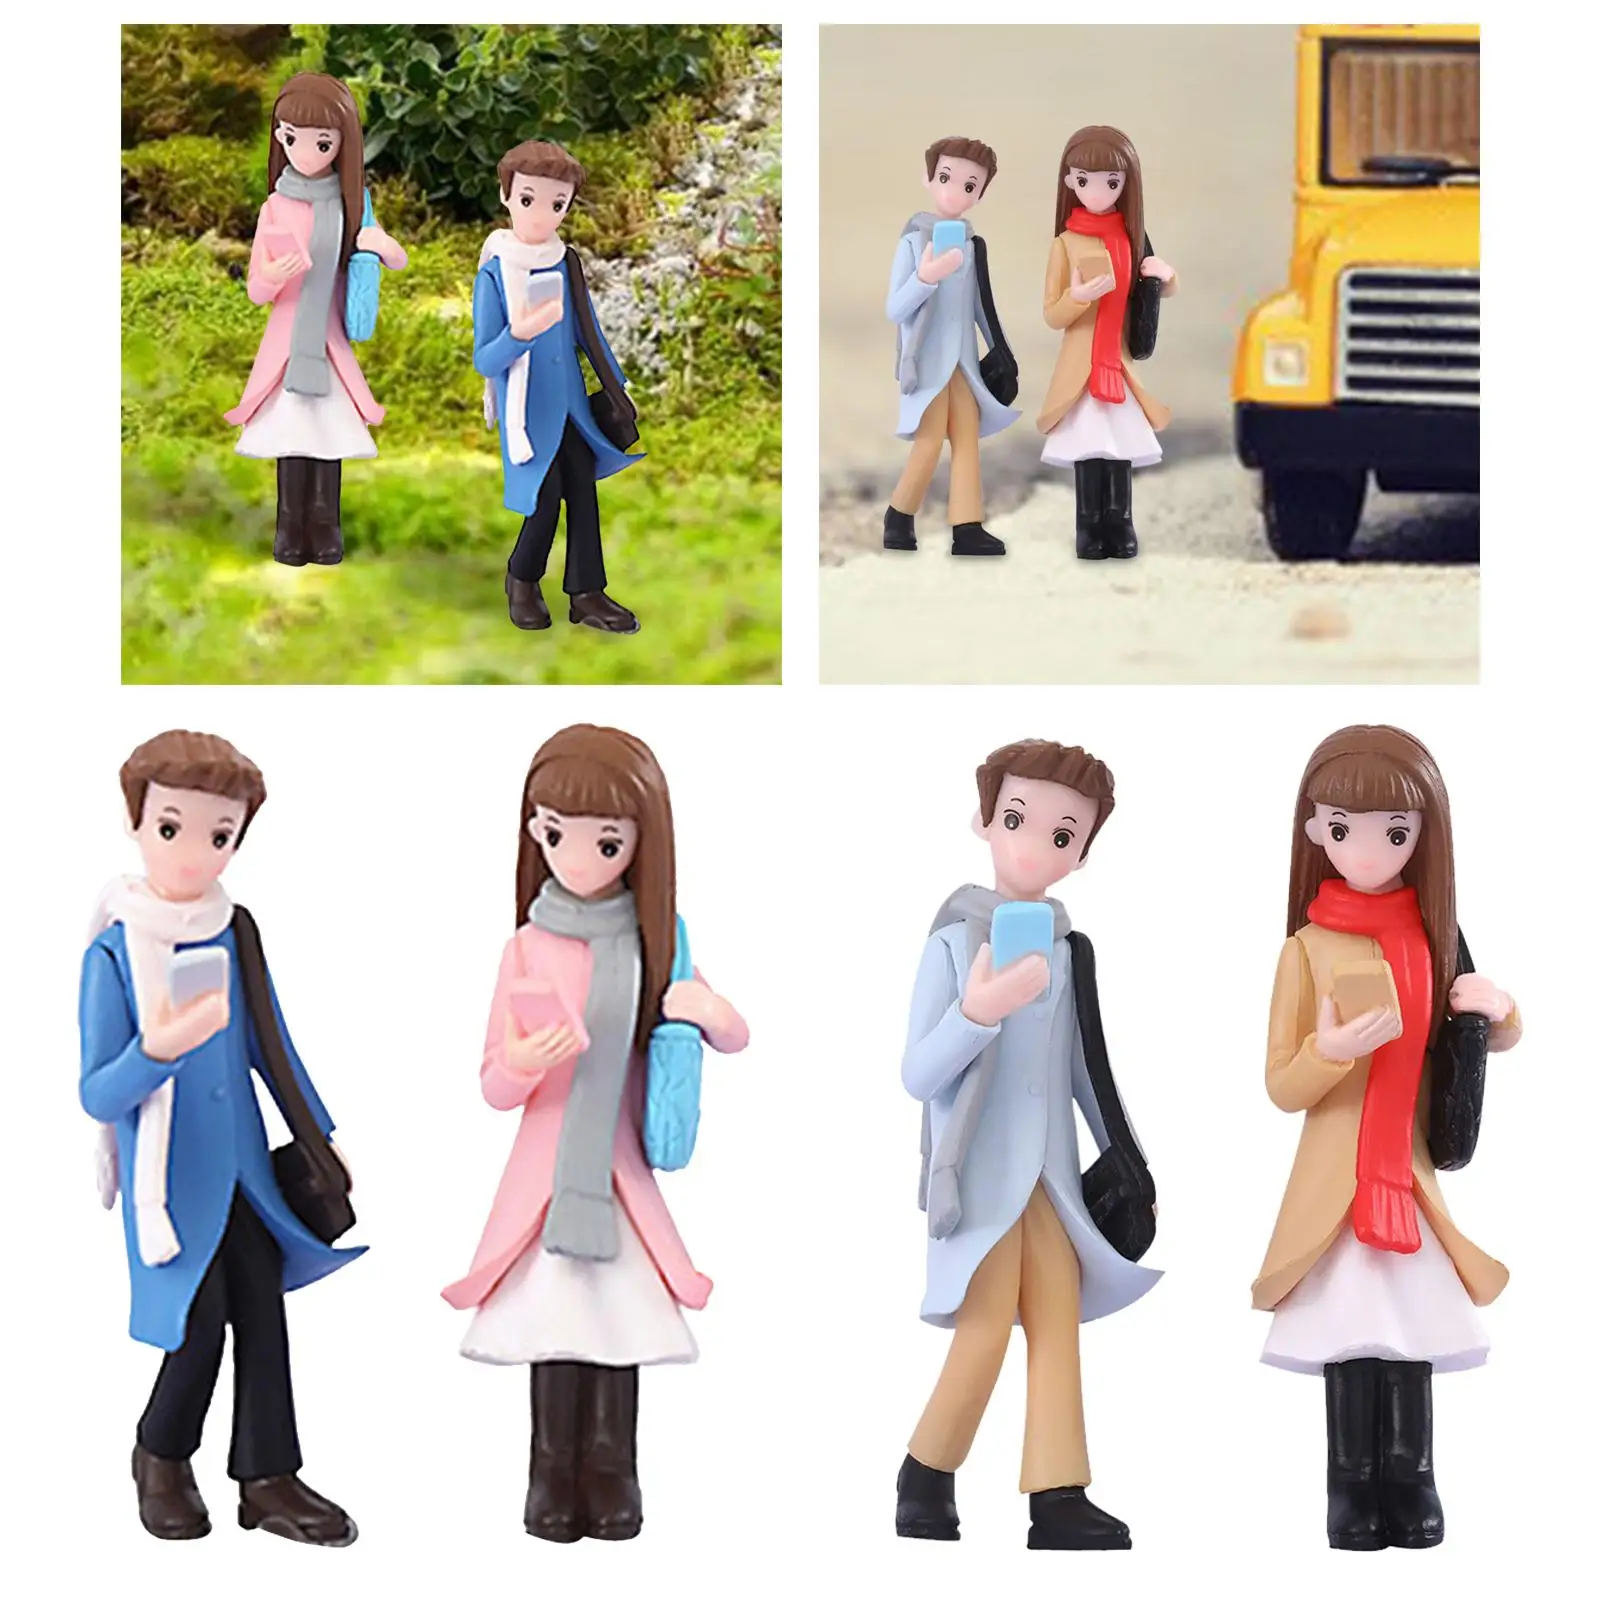 Phone Couple Hand Painted Miniature Park Street People Figures for Photography Props Scenery Landscape Dollhouse Accessories